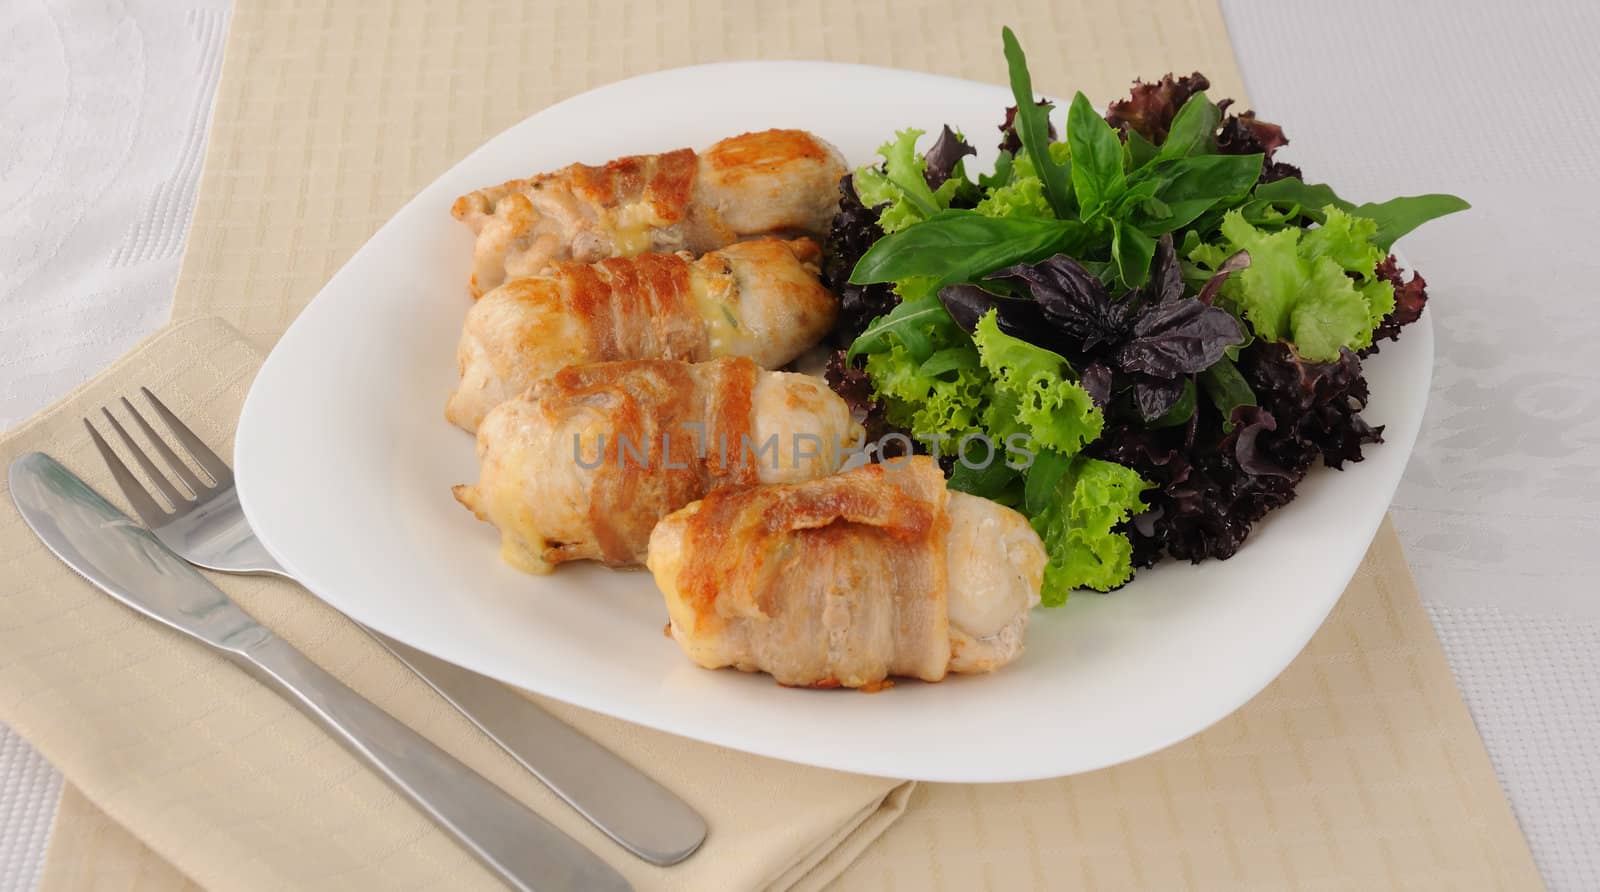 Chicken rolls stuffed with cheese, wrapped in bacon and herbs in a tomato-garlic sauce